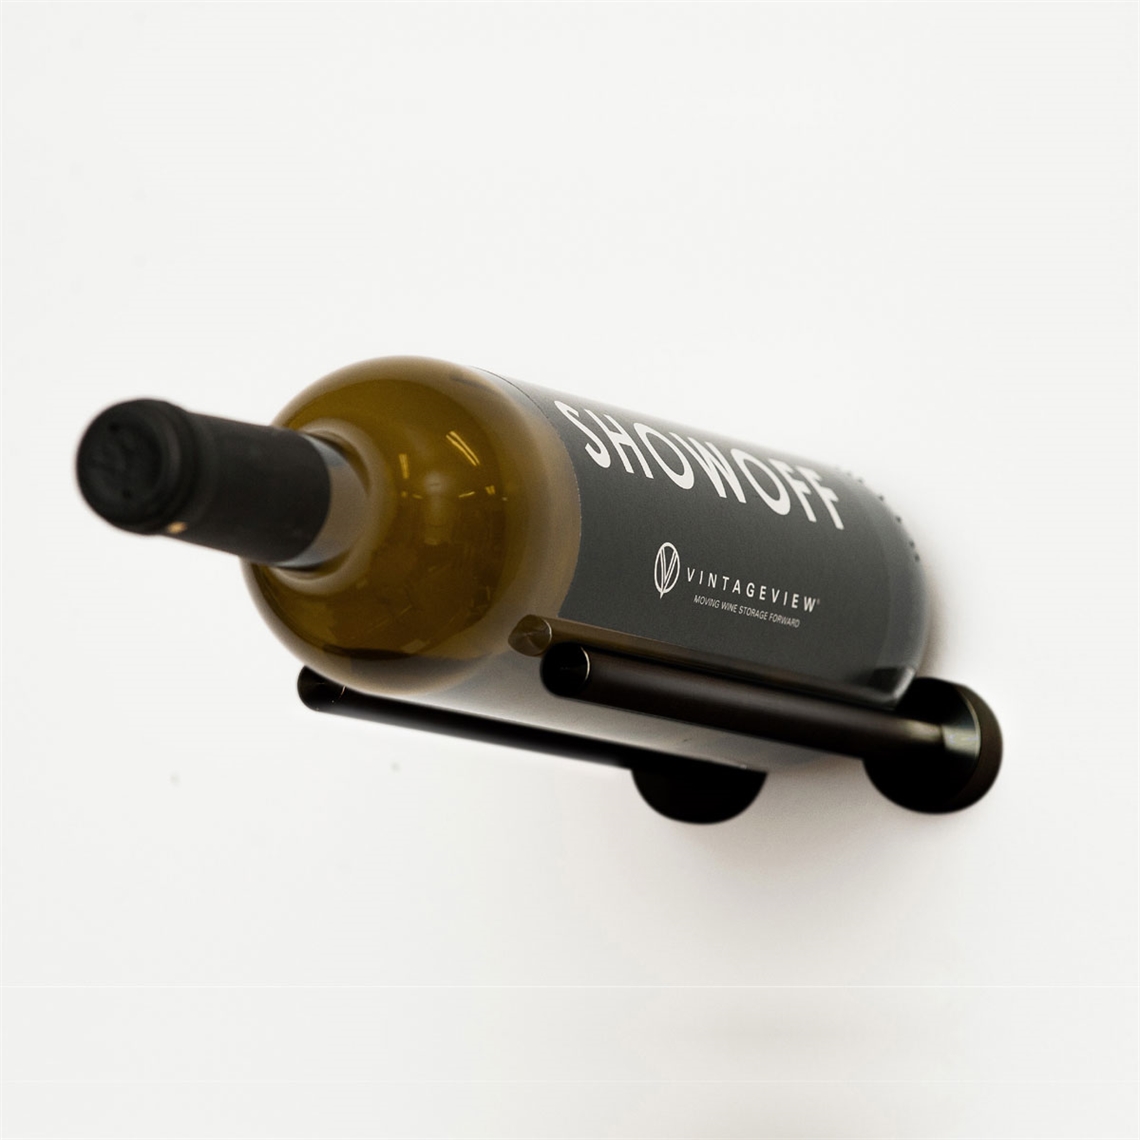 View more moveable wine storage from our Wall Mounted Wine Racks range